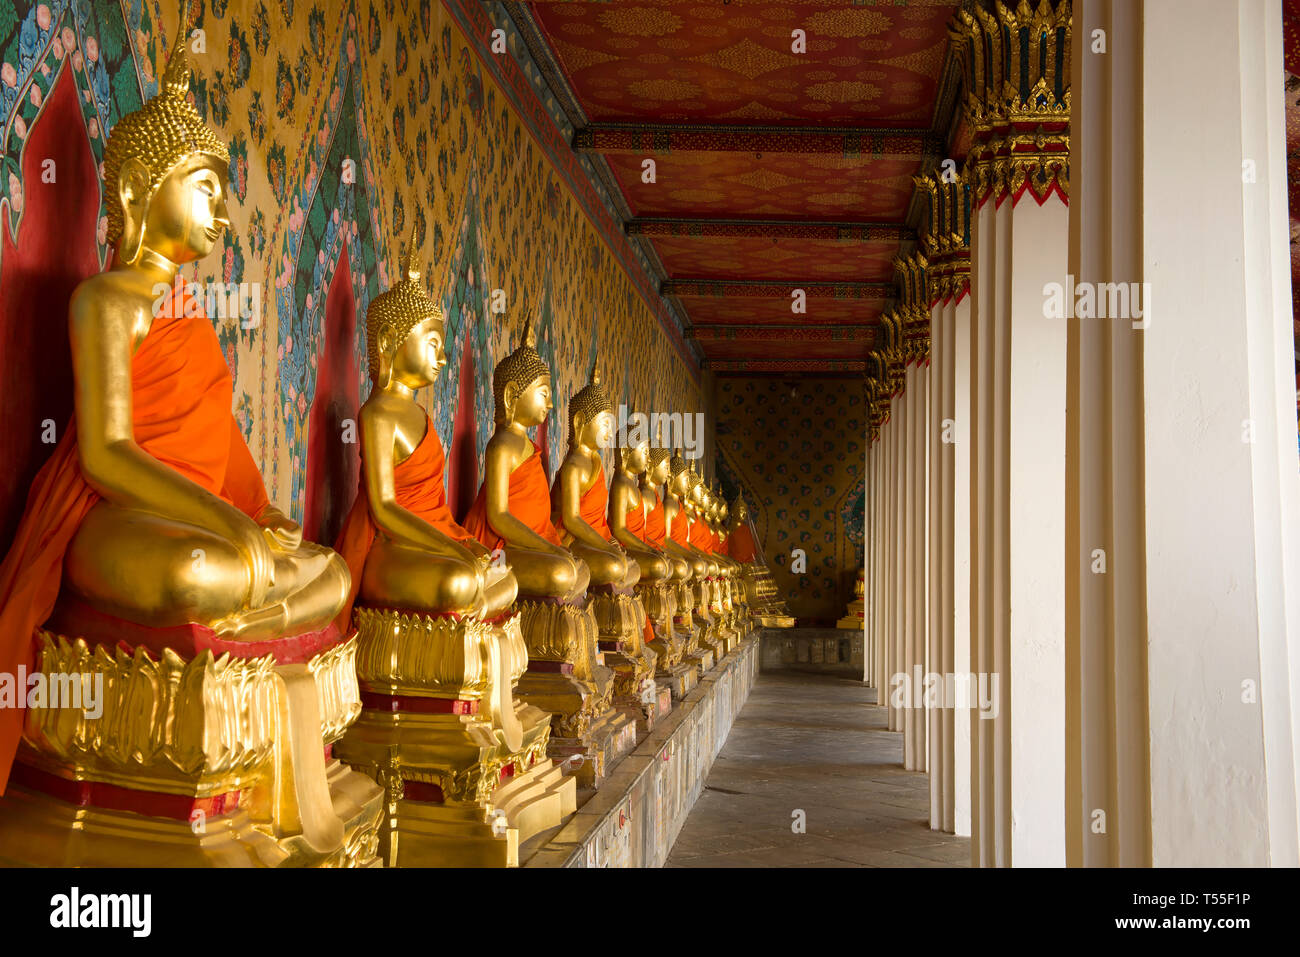 Gallery with sculptures of a seated Buddha in the Wat Arun temple. Bangkok, Thailand Stock Photo